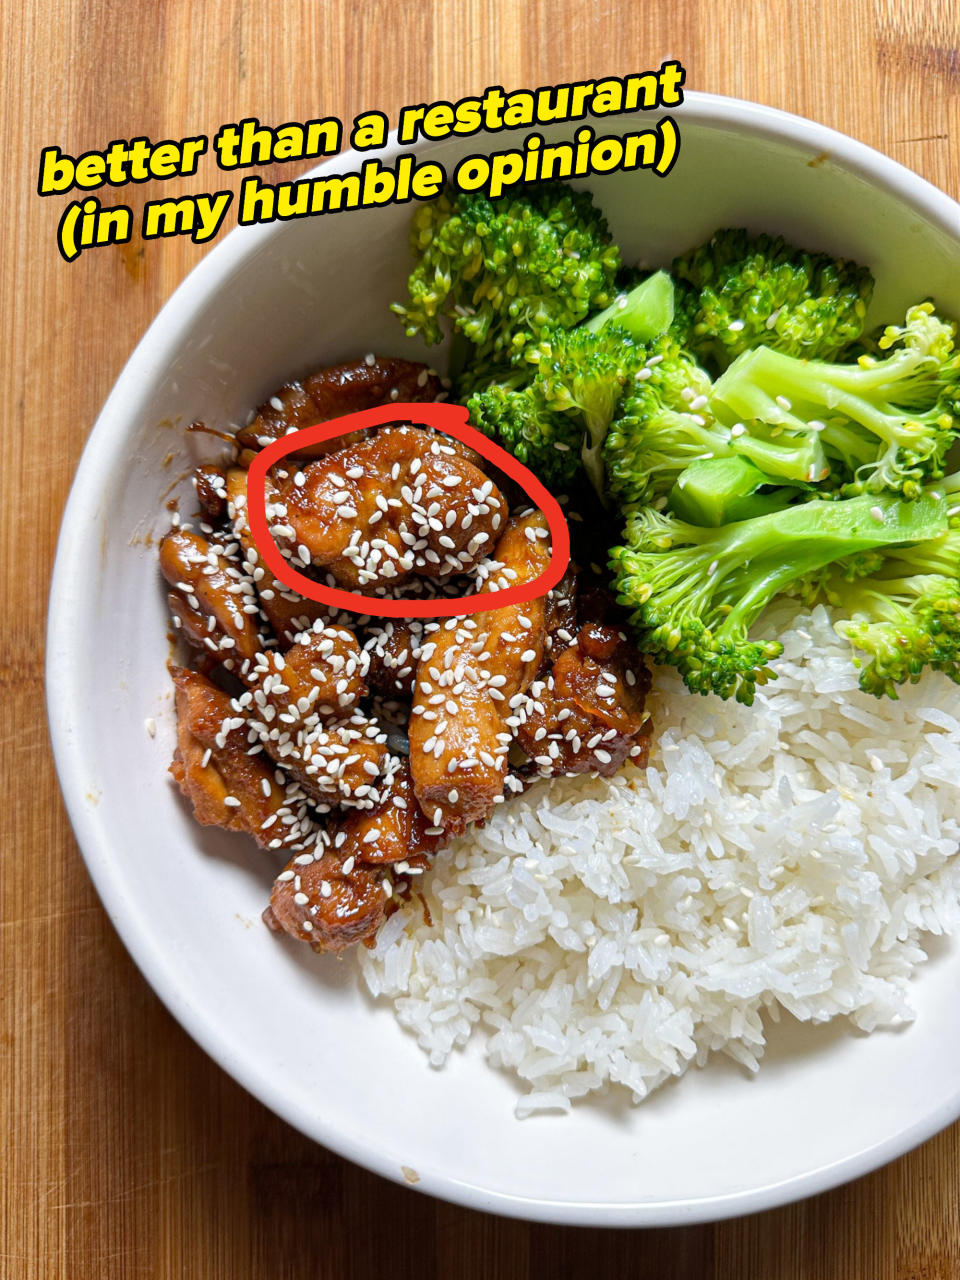 teriyaki chicken that's better than a restaurant, in the author's humble opinion